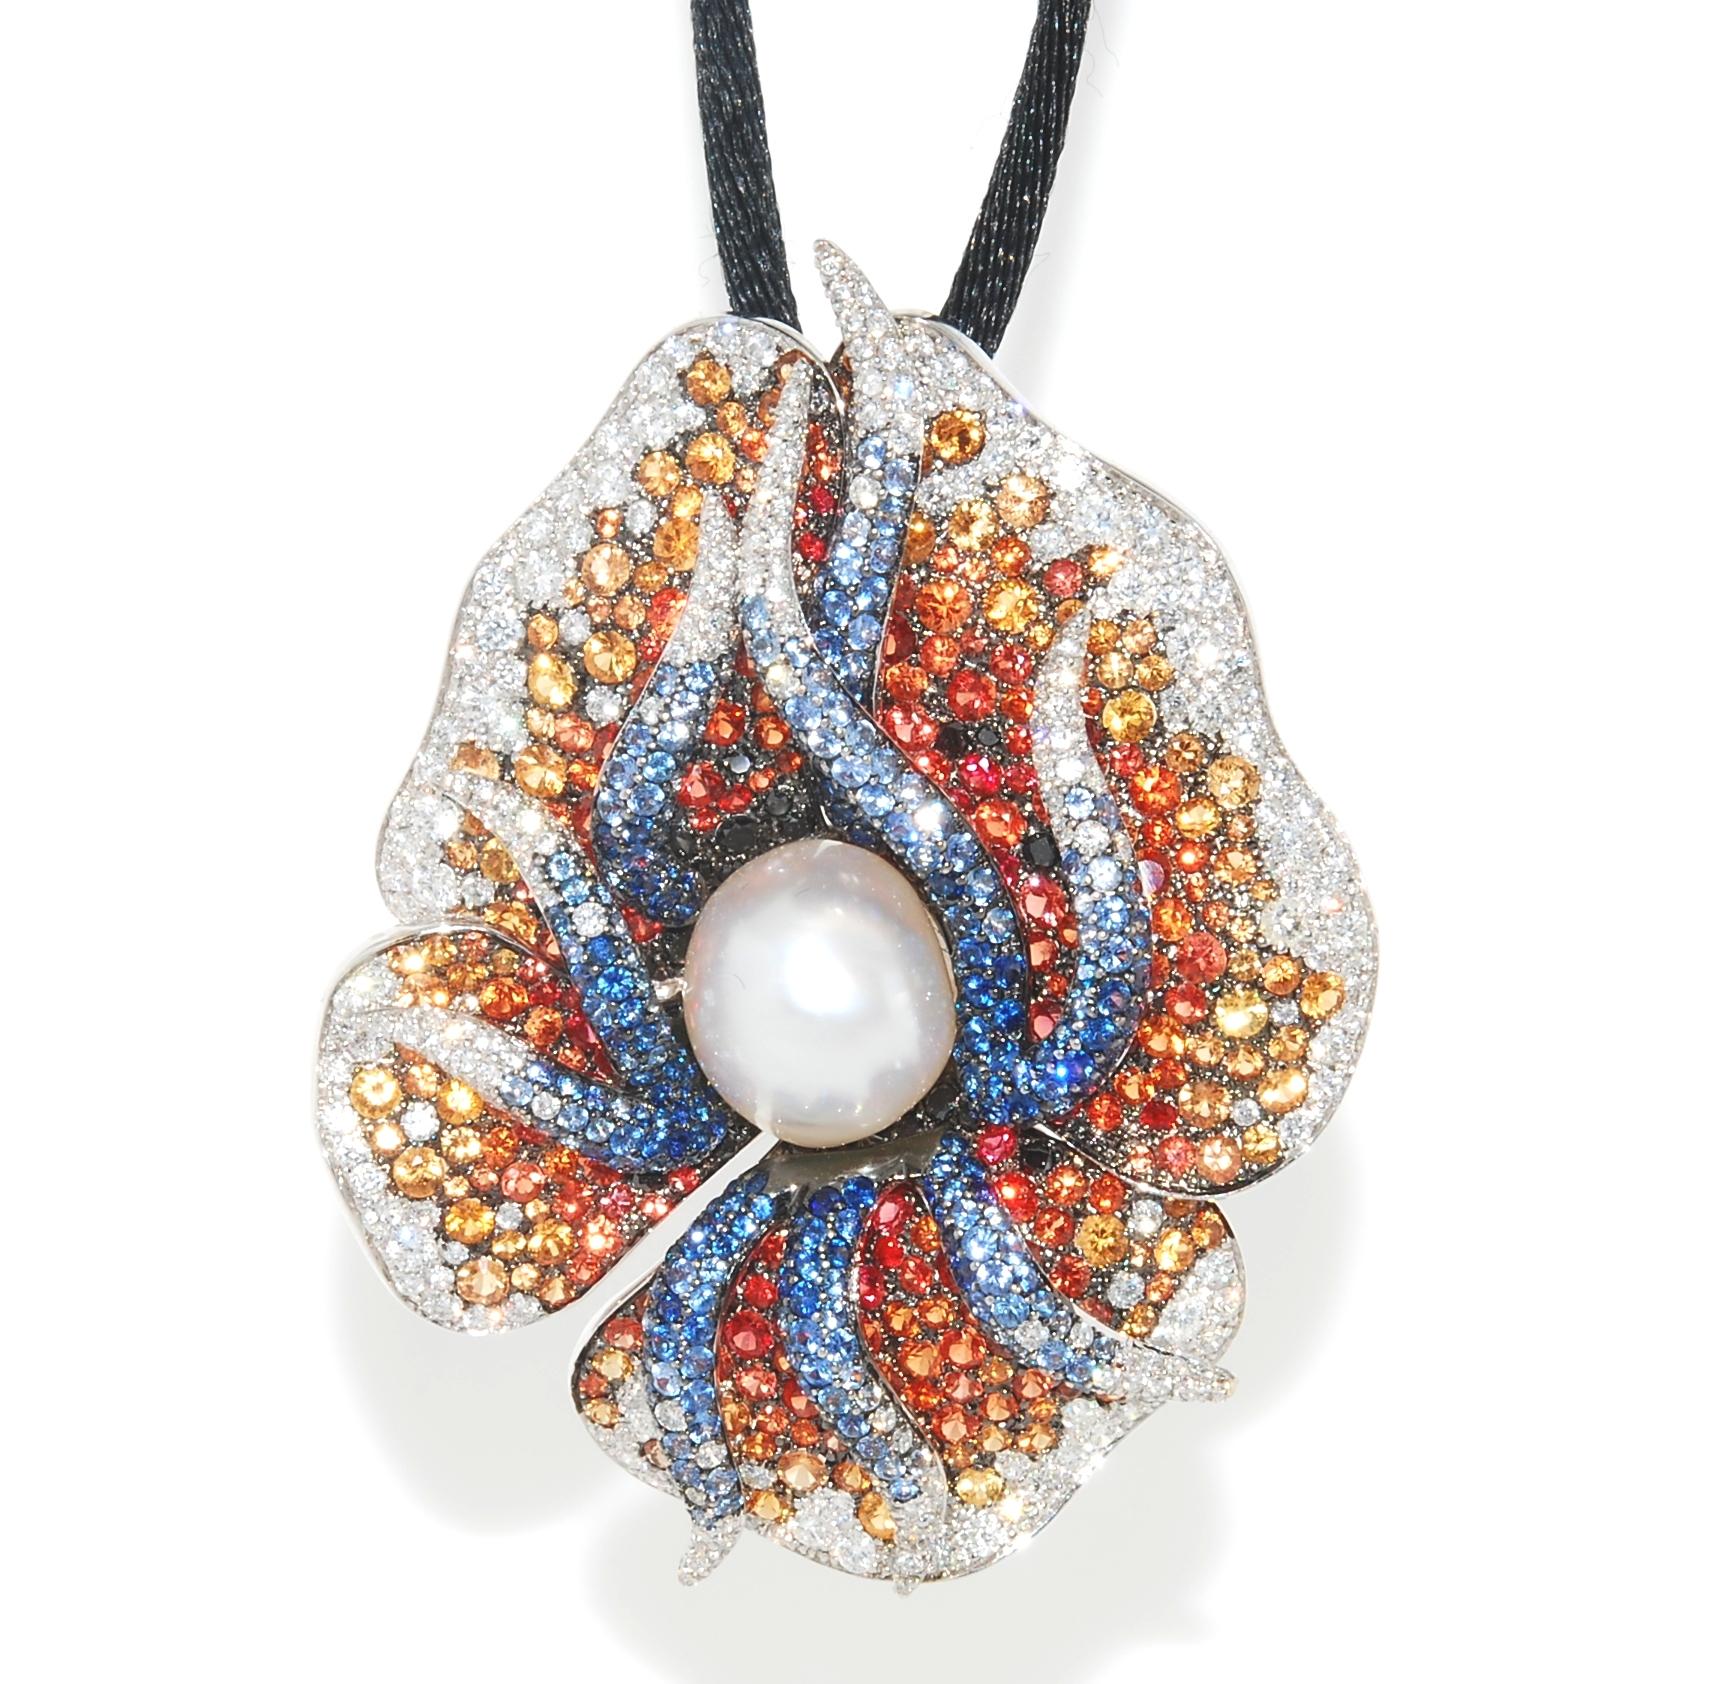 This pendant necklace from Maggioro's Pave & Pearl Collection. The necklace has a black silk cord and is accented with an white gold flower pendant. The flower features a lustrous white pearl  13.9 x 11.5 mm's, accented with 1.26ctw of black and